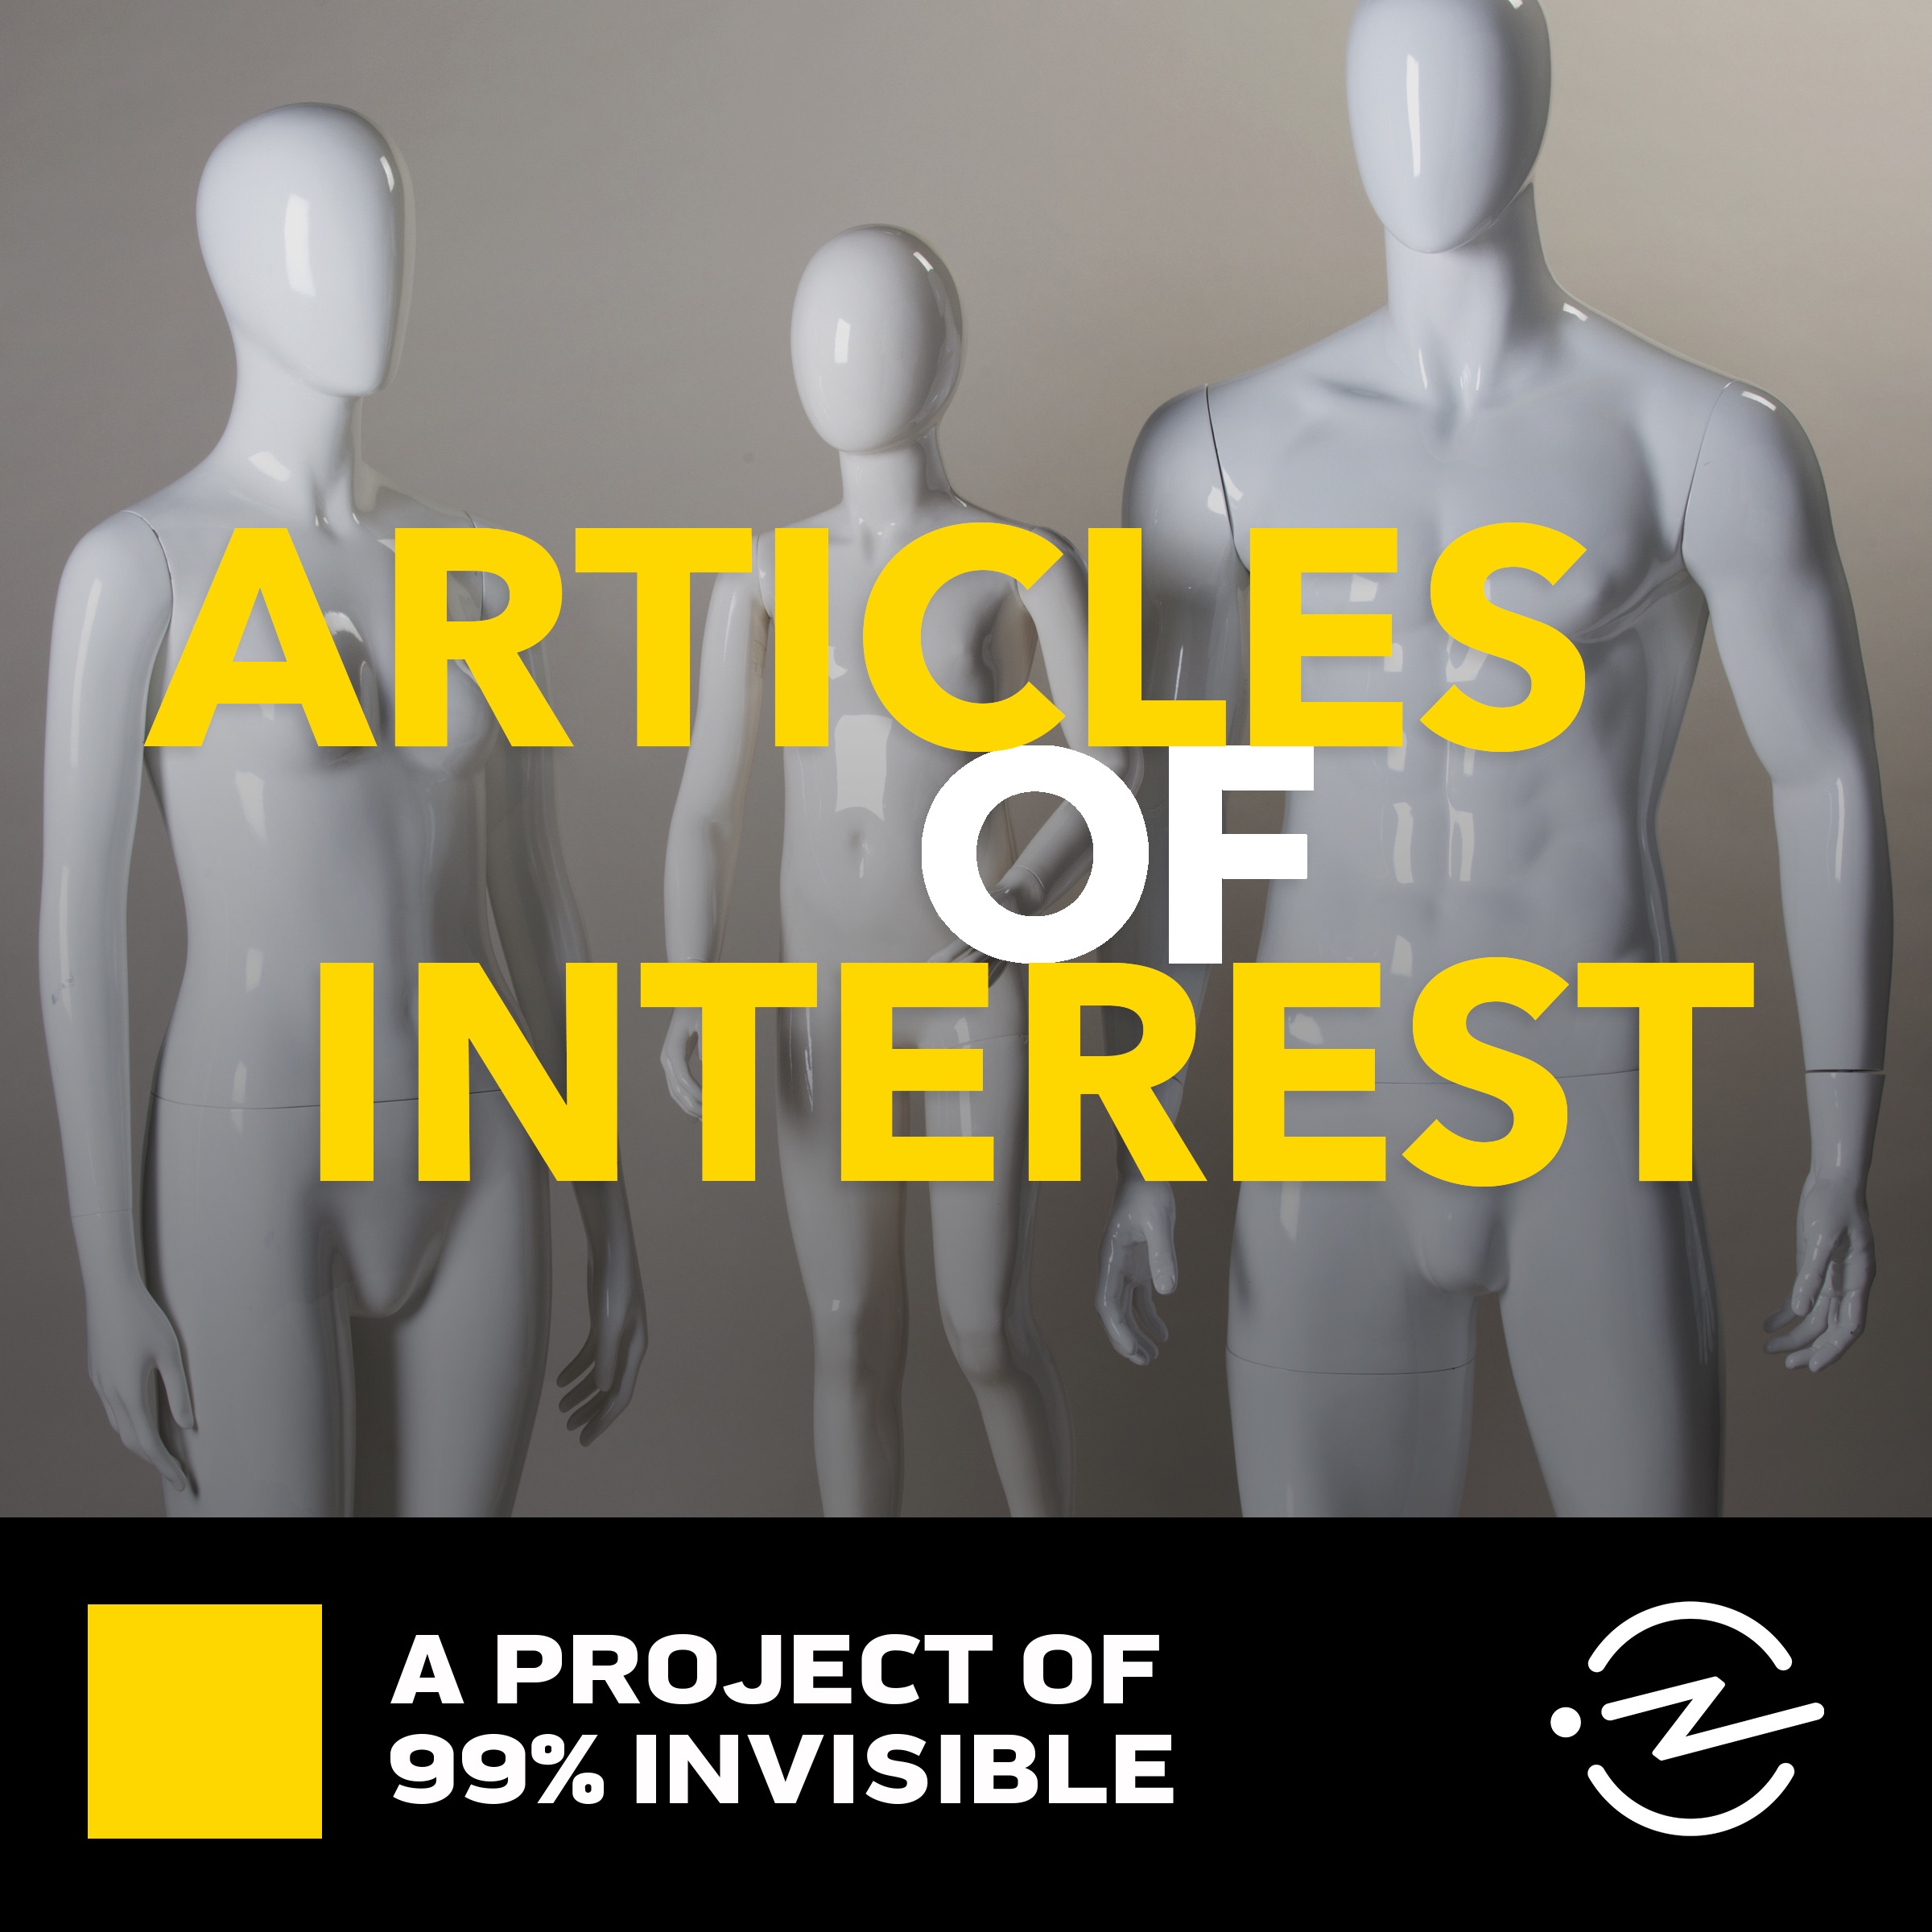 Articles of Interest:Avery Trufelman and 99% Invisible